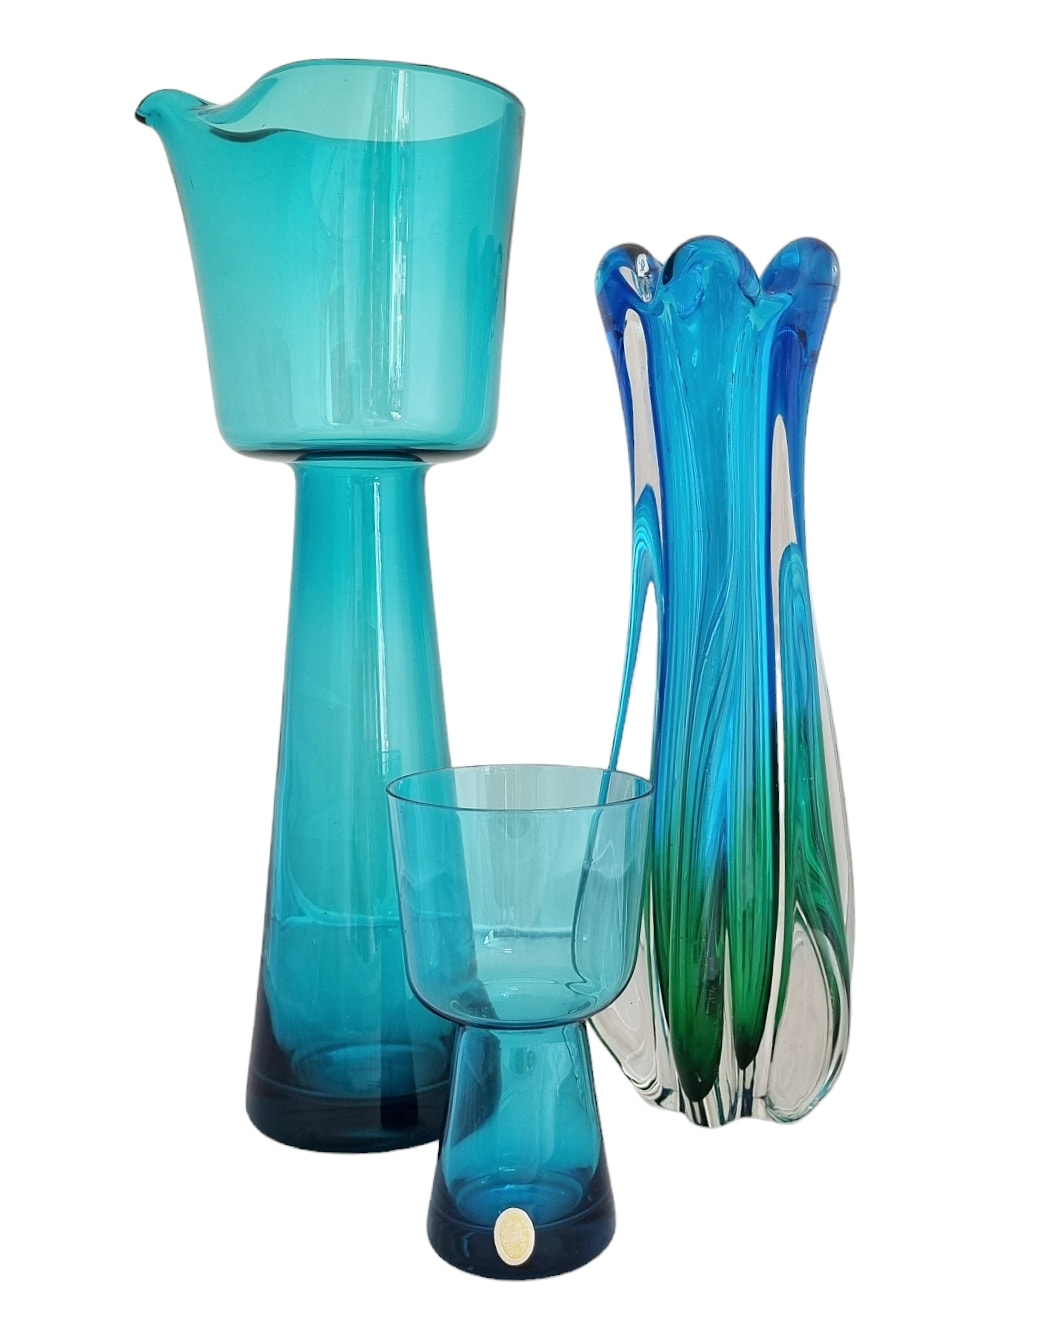 Mid Century Turquoise Blue Tall Jug with Glass, Poland c.1960 - $160 the pair // Mid Century Blue & Green Art Glass Vase by Sanyu, Japan c.1960